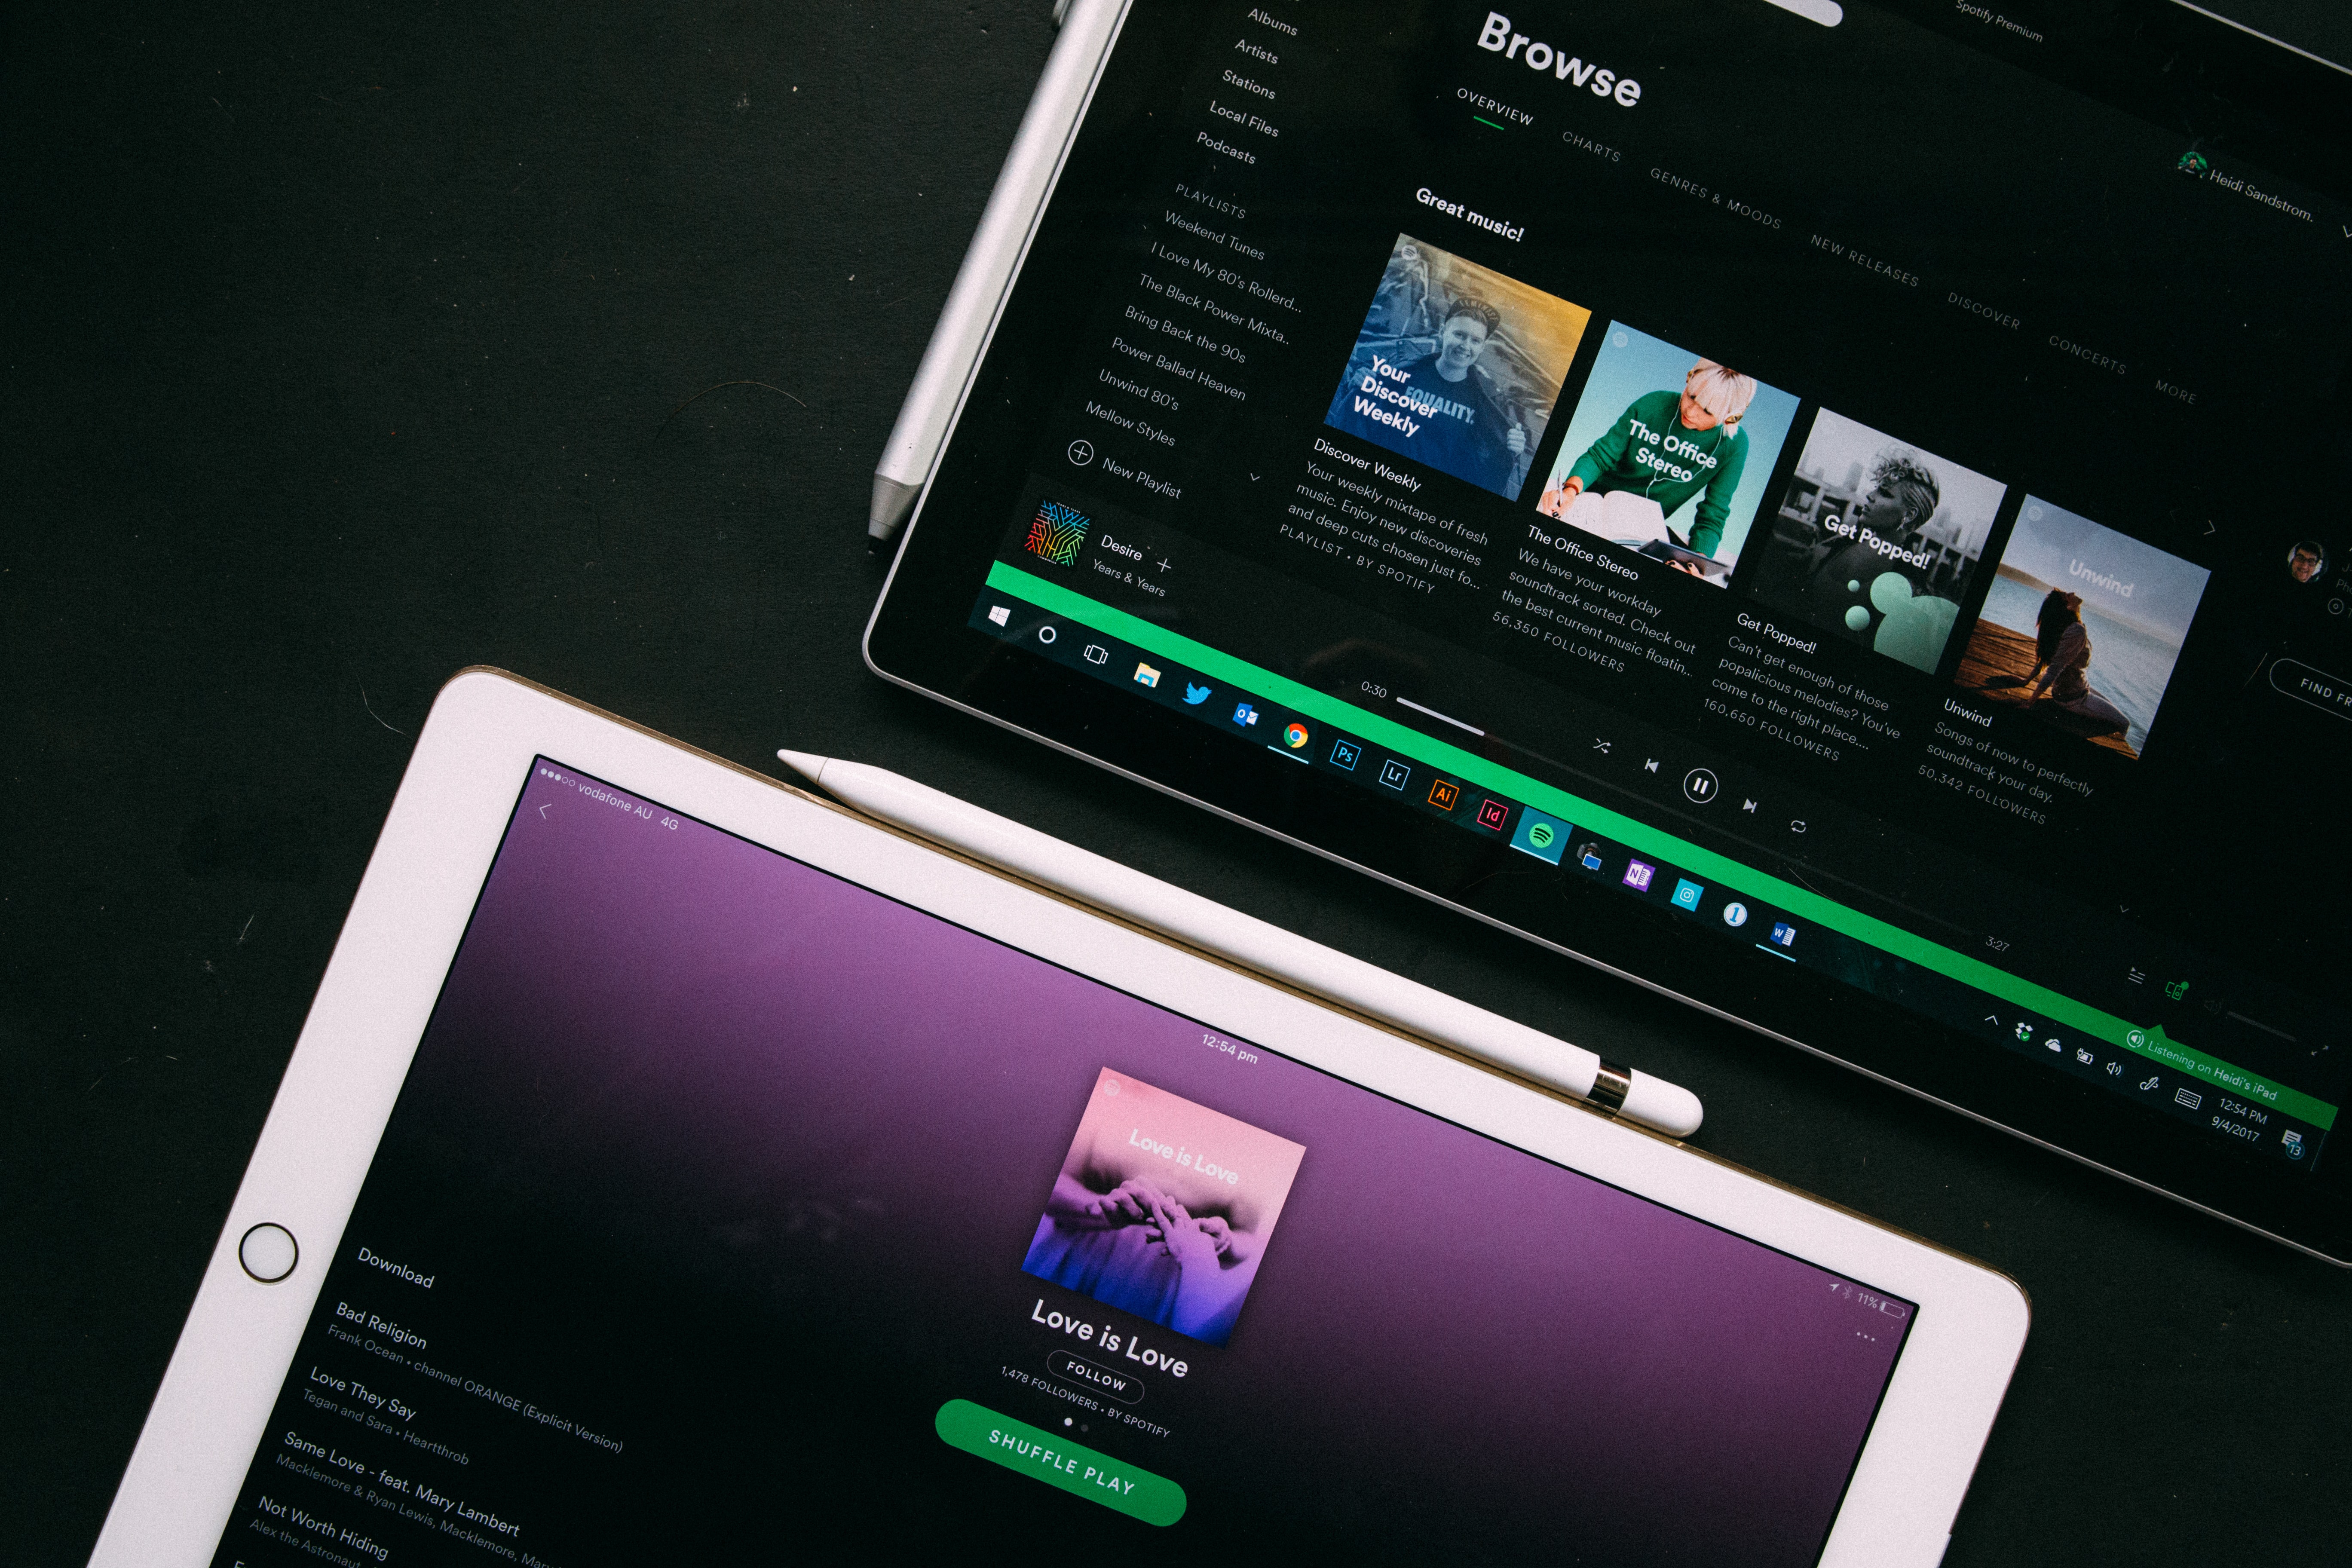 You can now search for a song on Spotify by lyrics